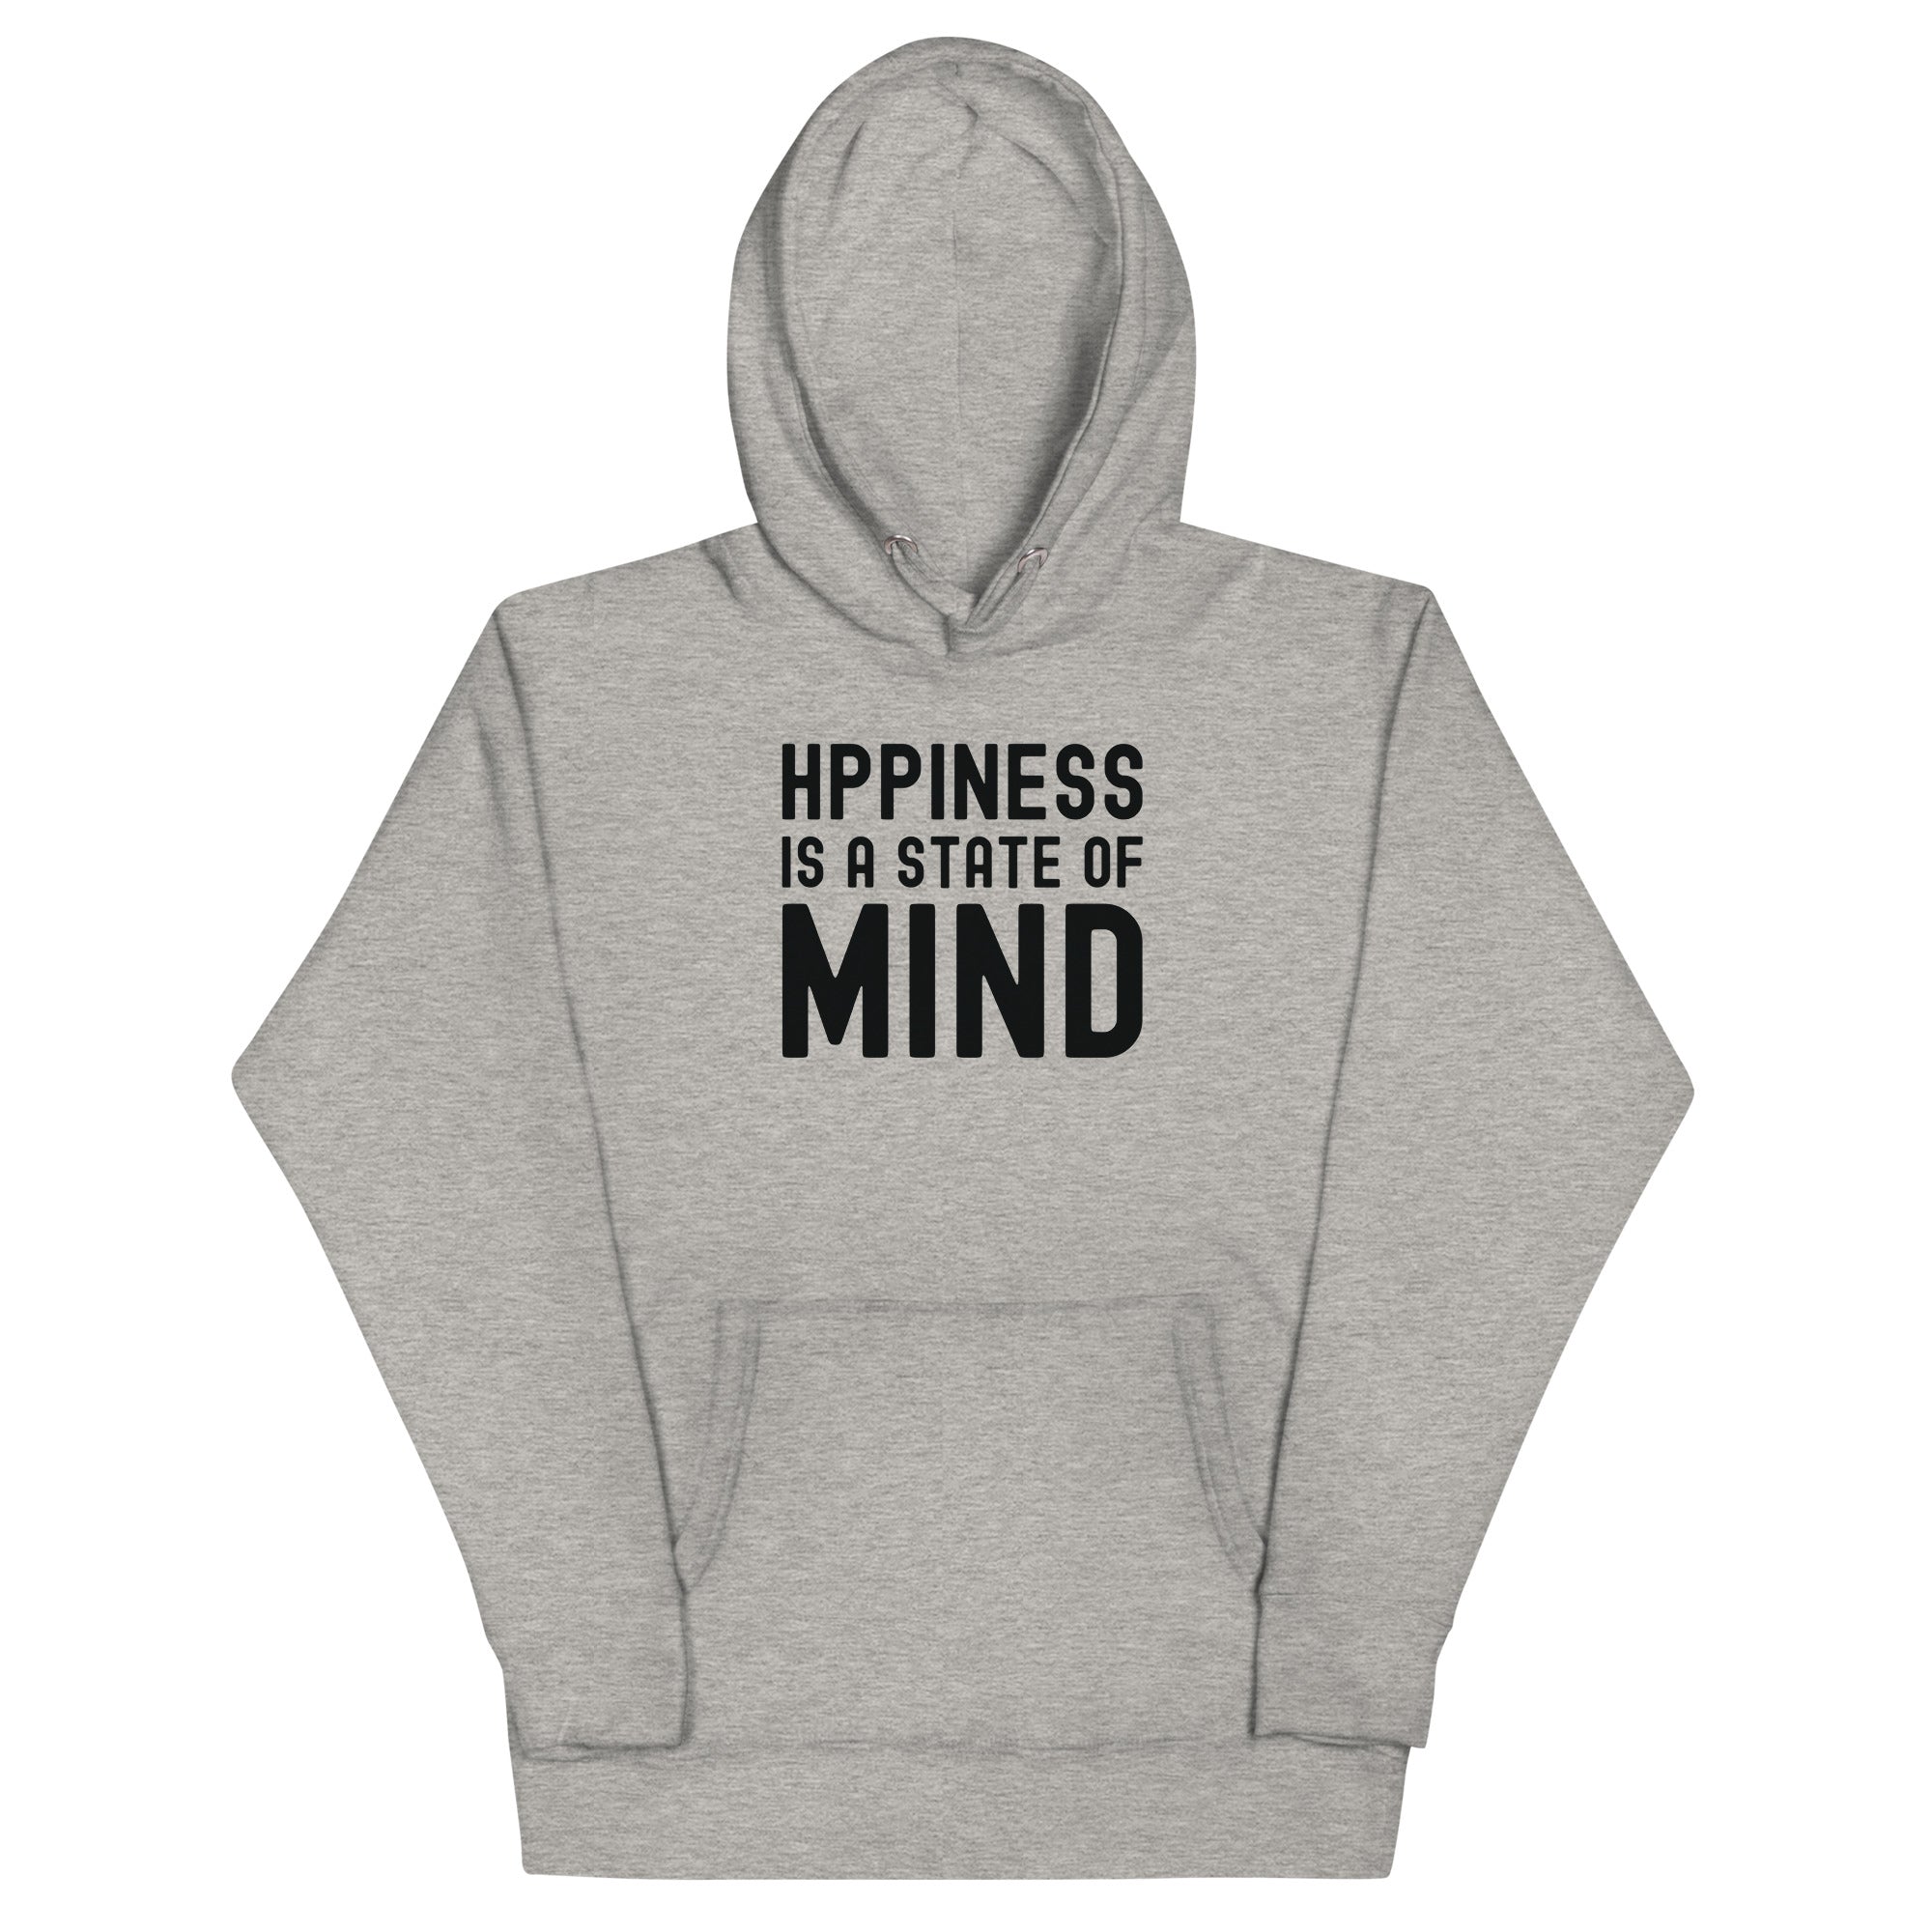 Unisex Hoodie | Hppiness is a state of mind